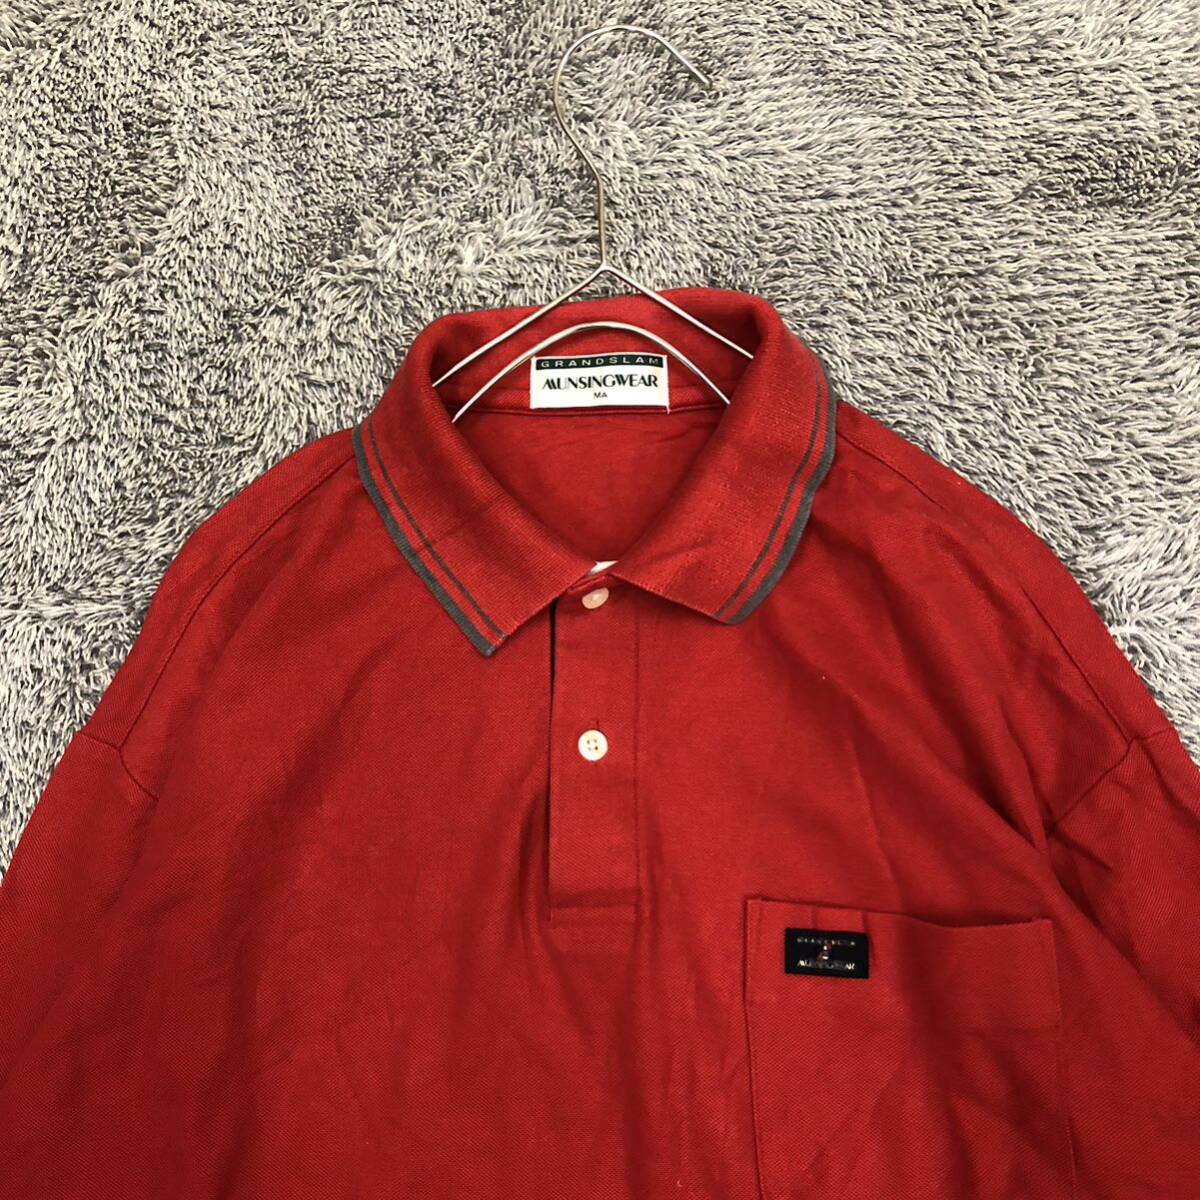 Munsingwear Munsingwear wear polo-shirt with long sleeves size MA deer . deer. . red red one Point plain men's tops there is no highest bid (V17)